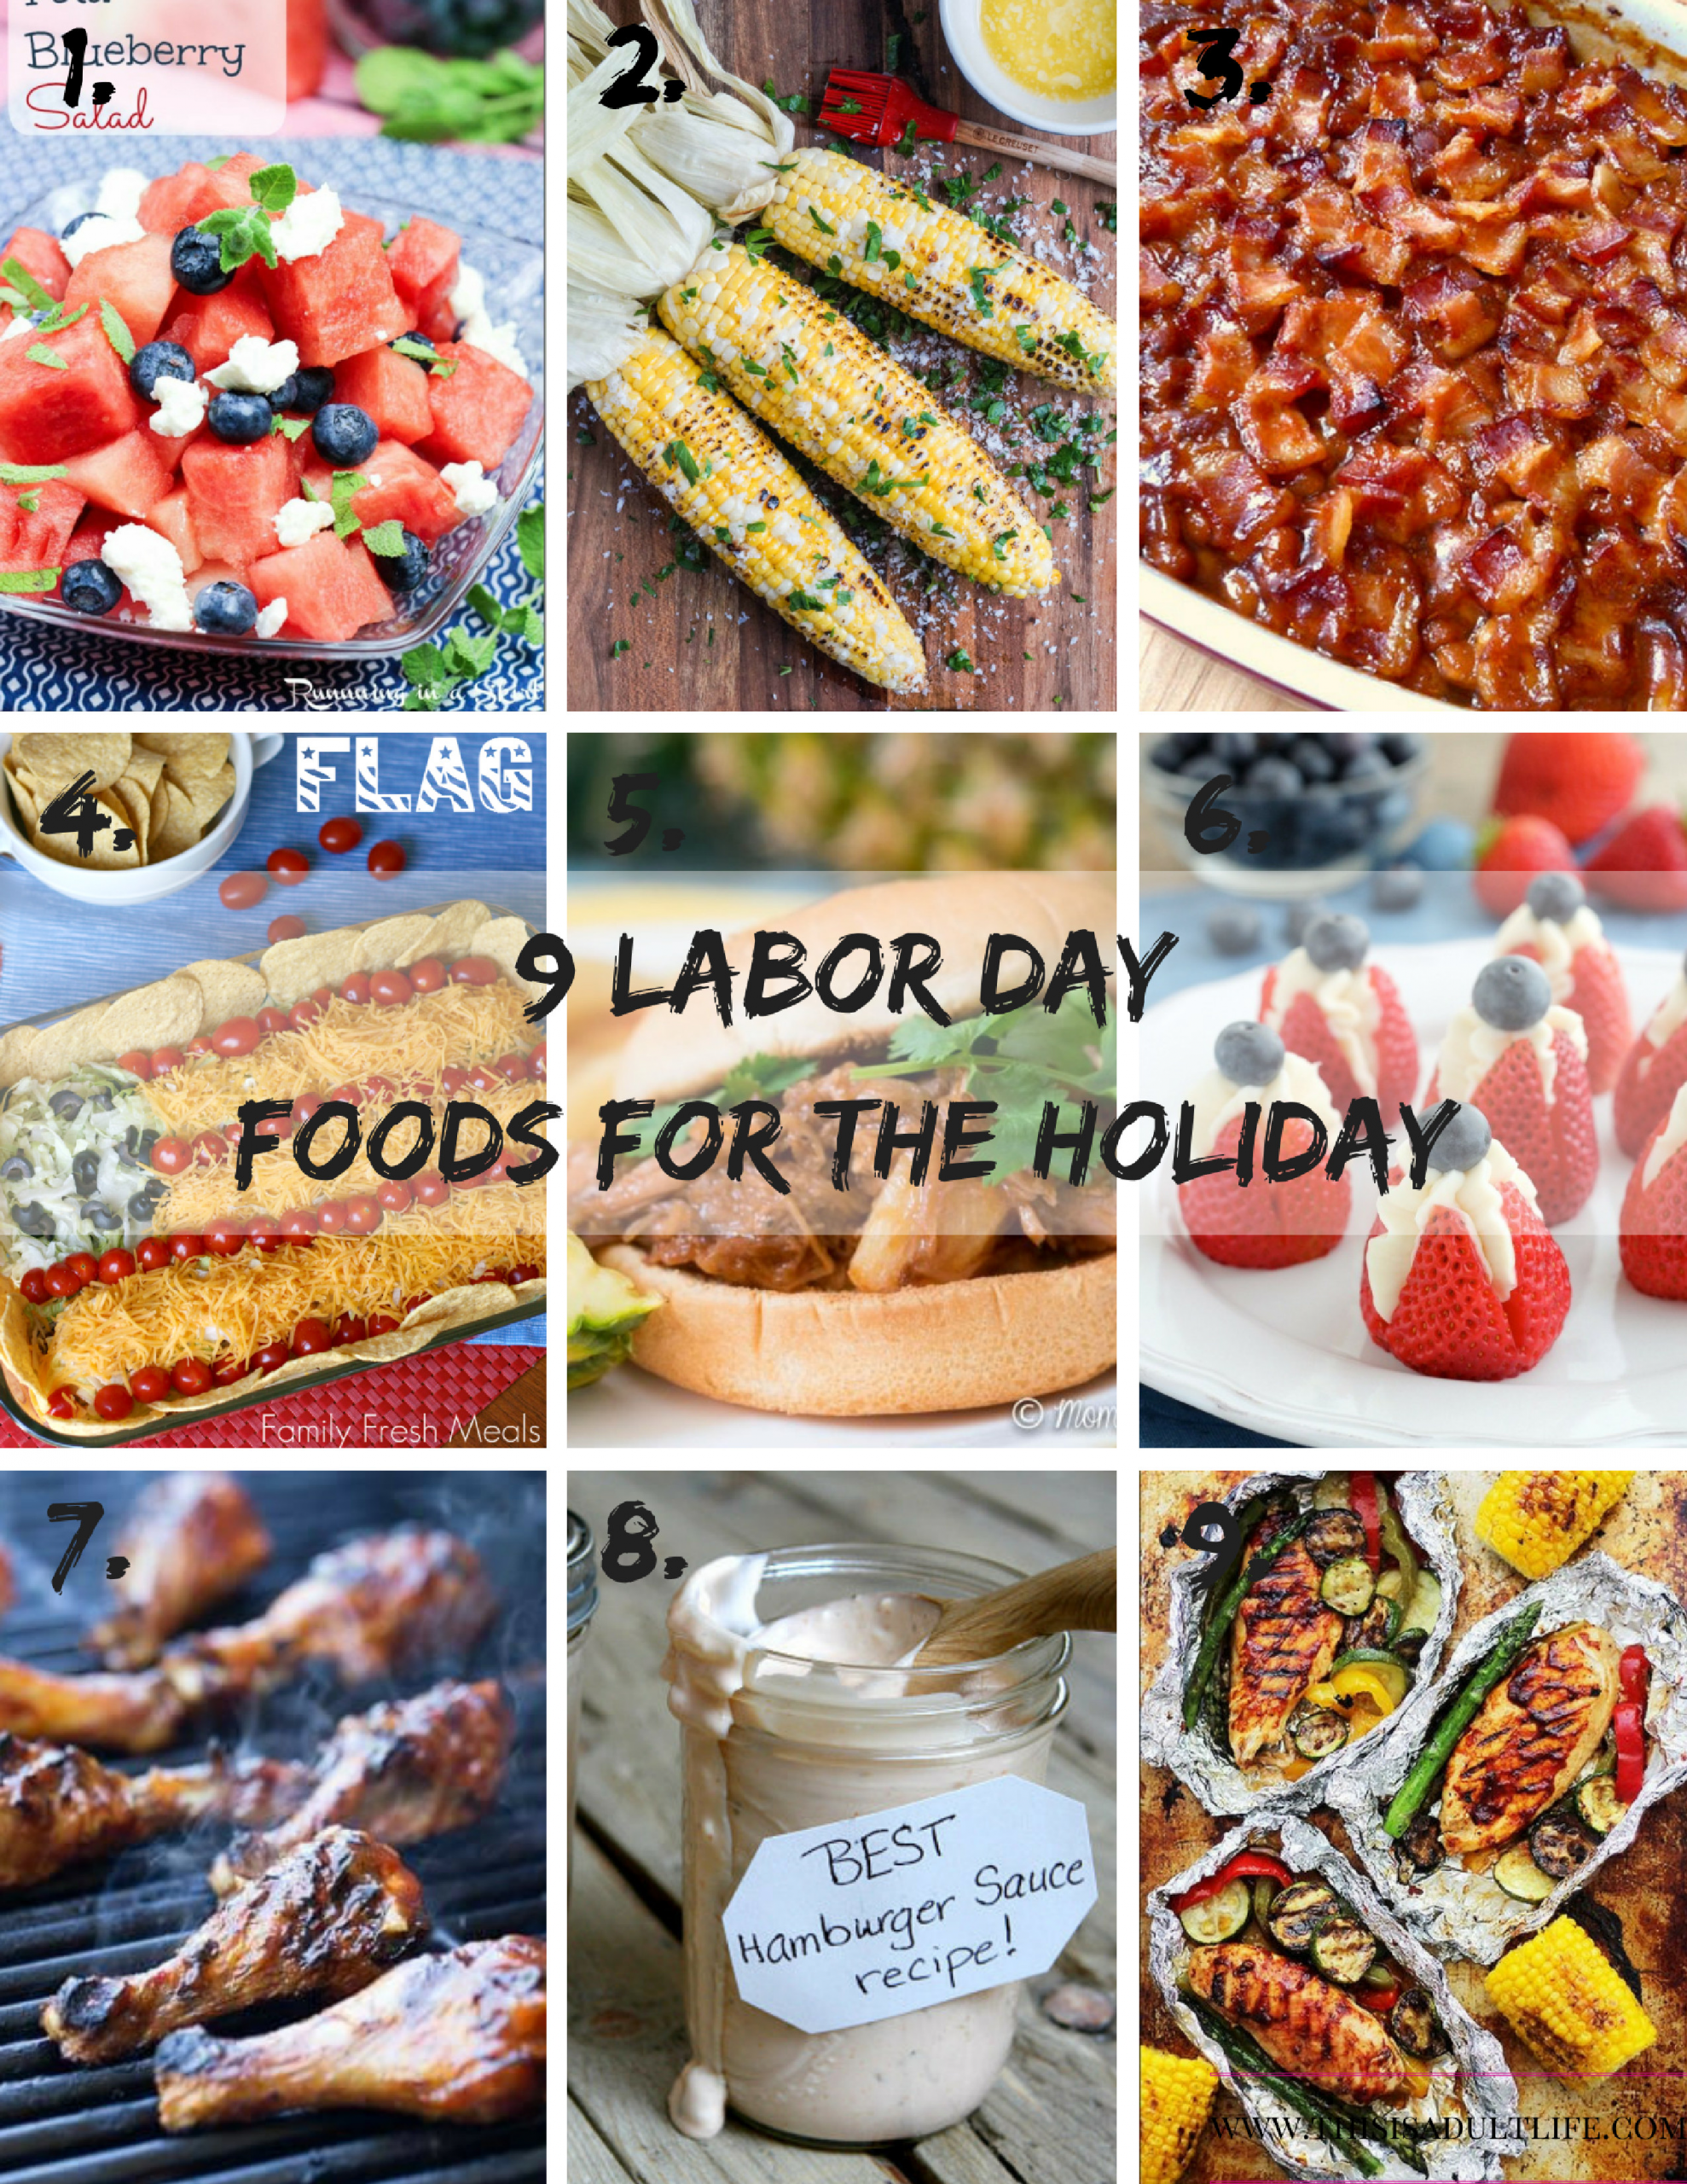 Labor Day Food Ideas
 9 Labor Day Food Ideas for the Holiday This is Adult Life